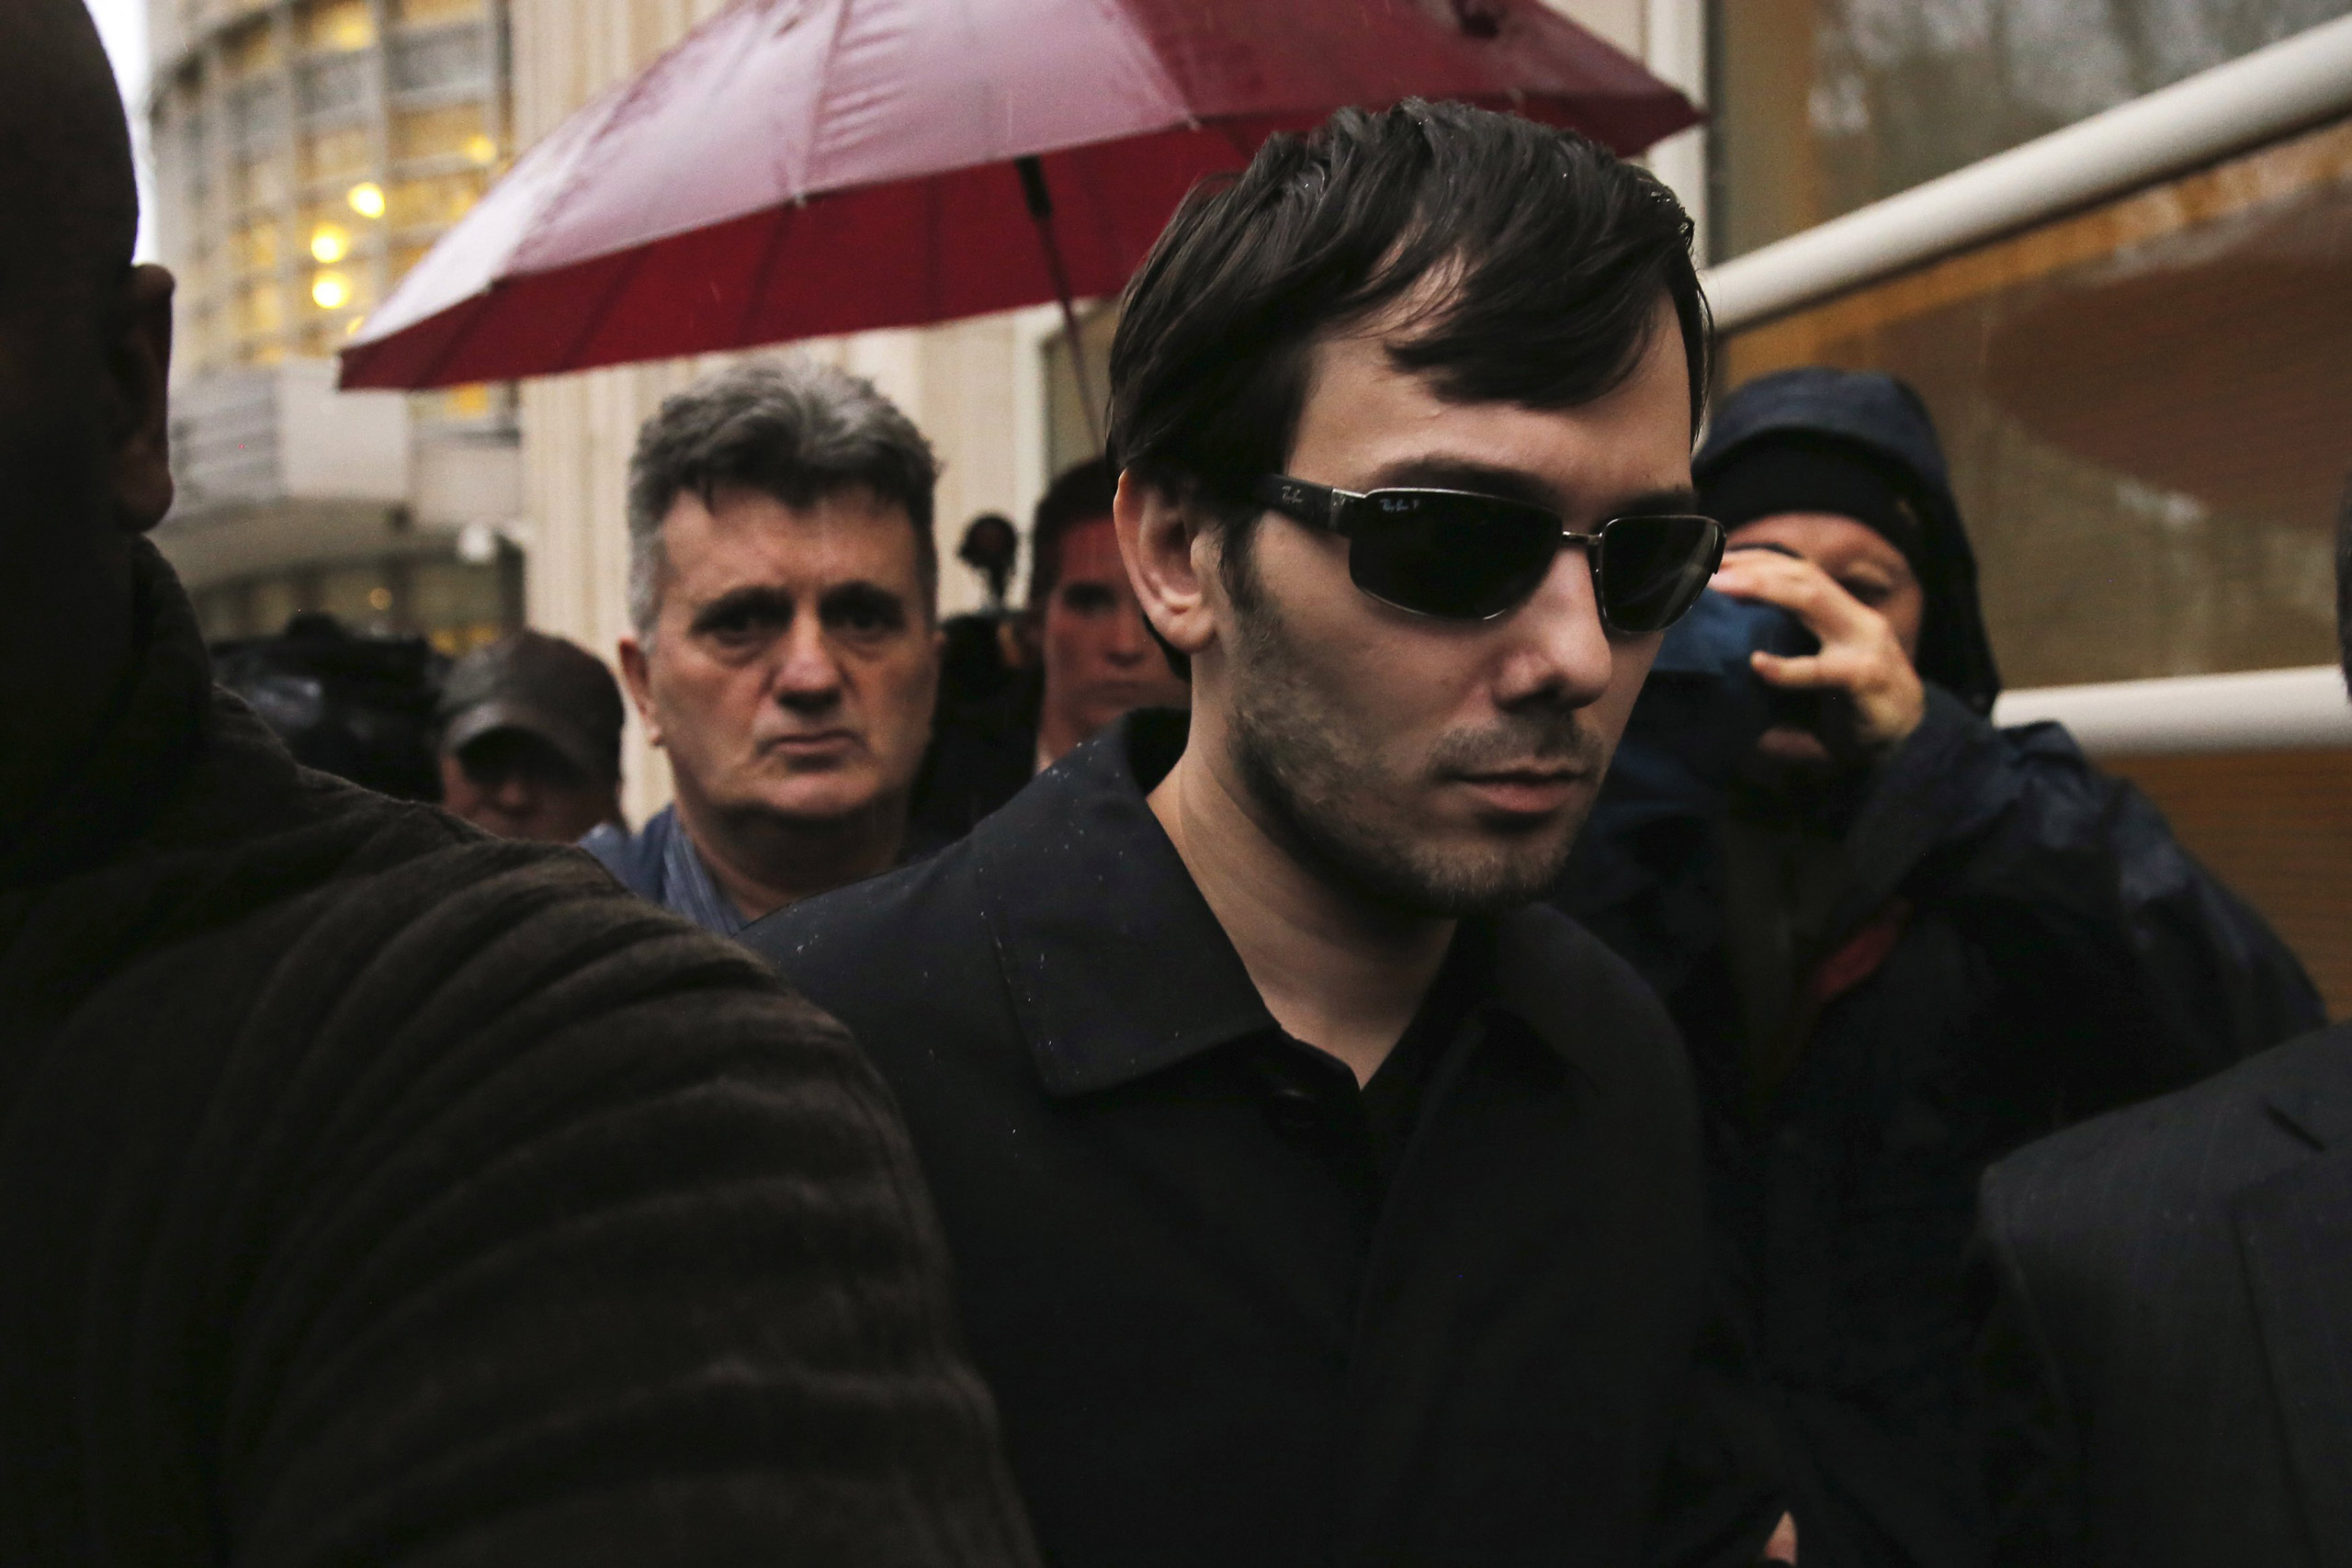 Martin Shkreli, chief executive officer of Turing Pharmaceuticals and KaloBios Pharmaceuticals, departs U.S. Federal Court in New York City on Dec. 17, 2015 (Lucas Jackson—Reuters)